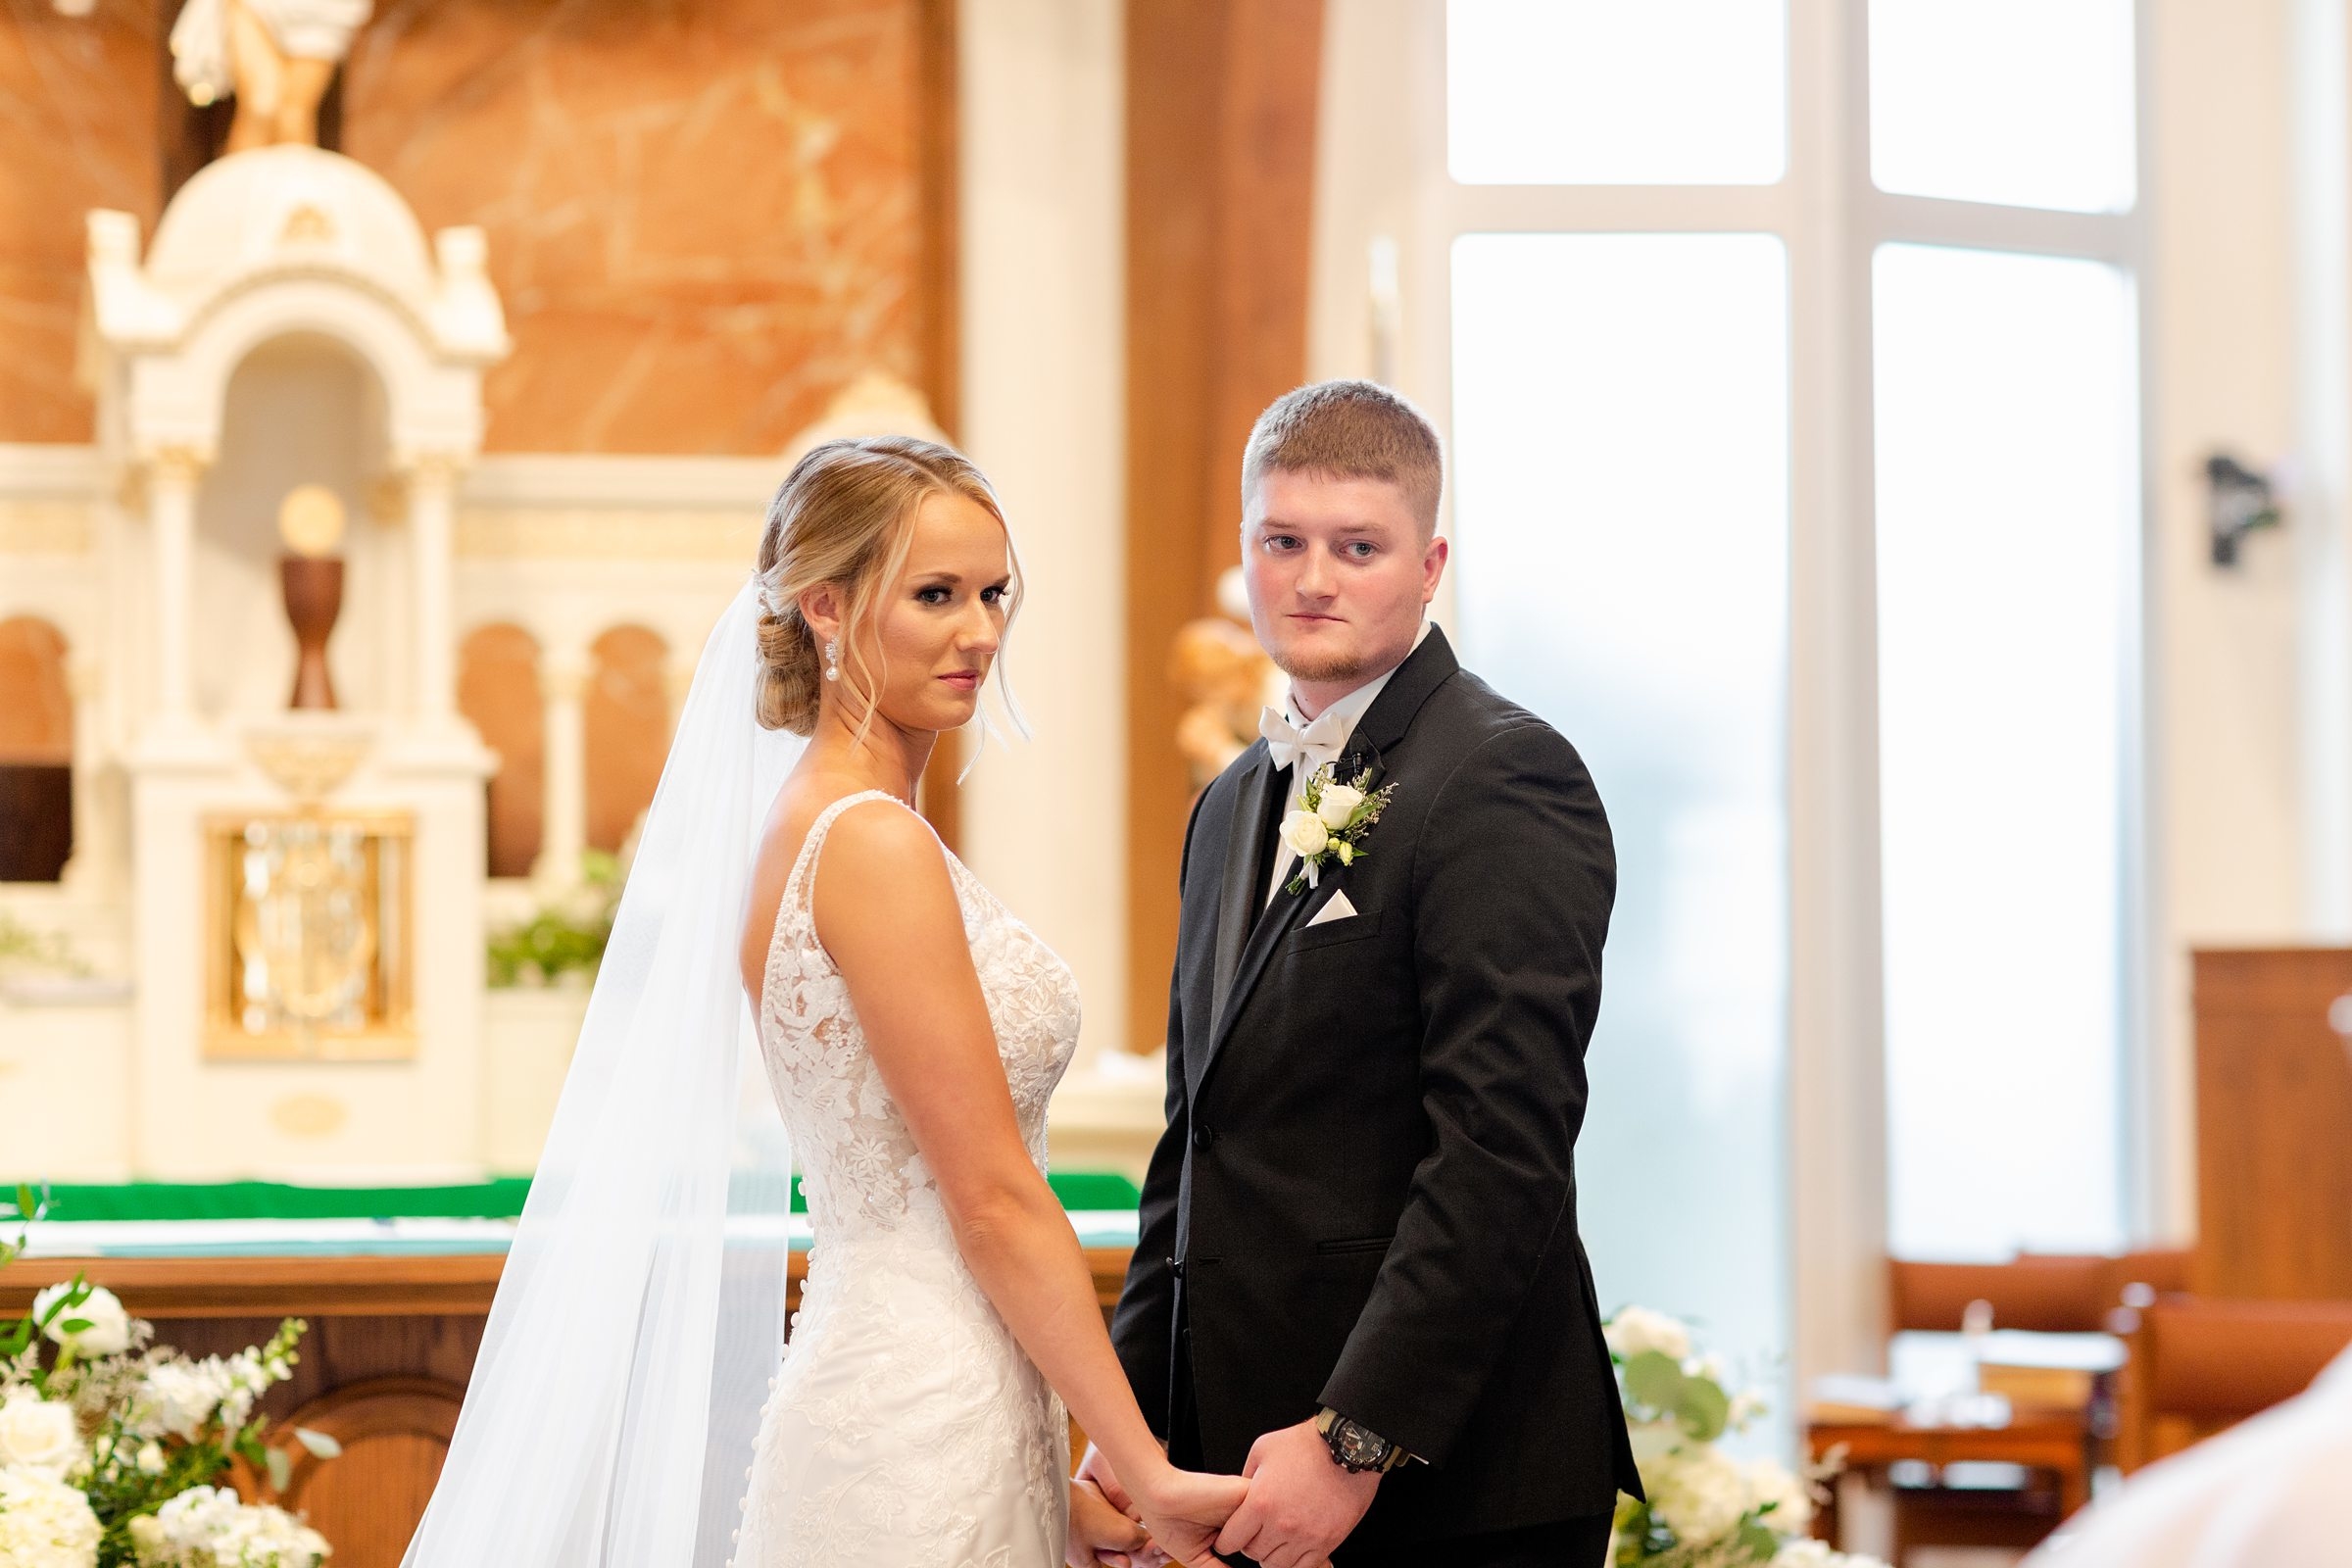 Hannah and Cody's Wedding in Booneville, IN144.jpg